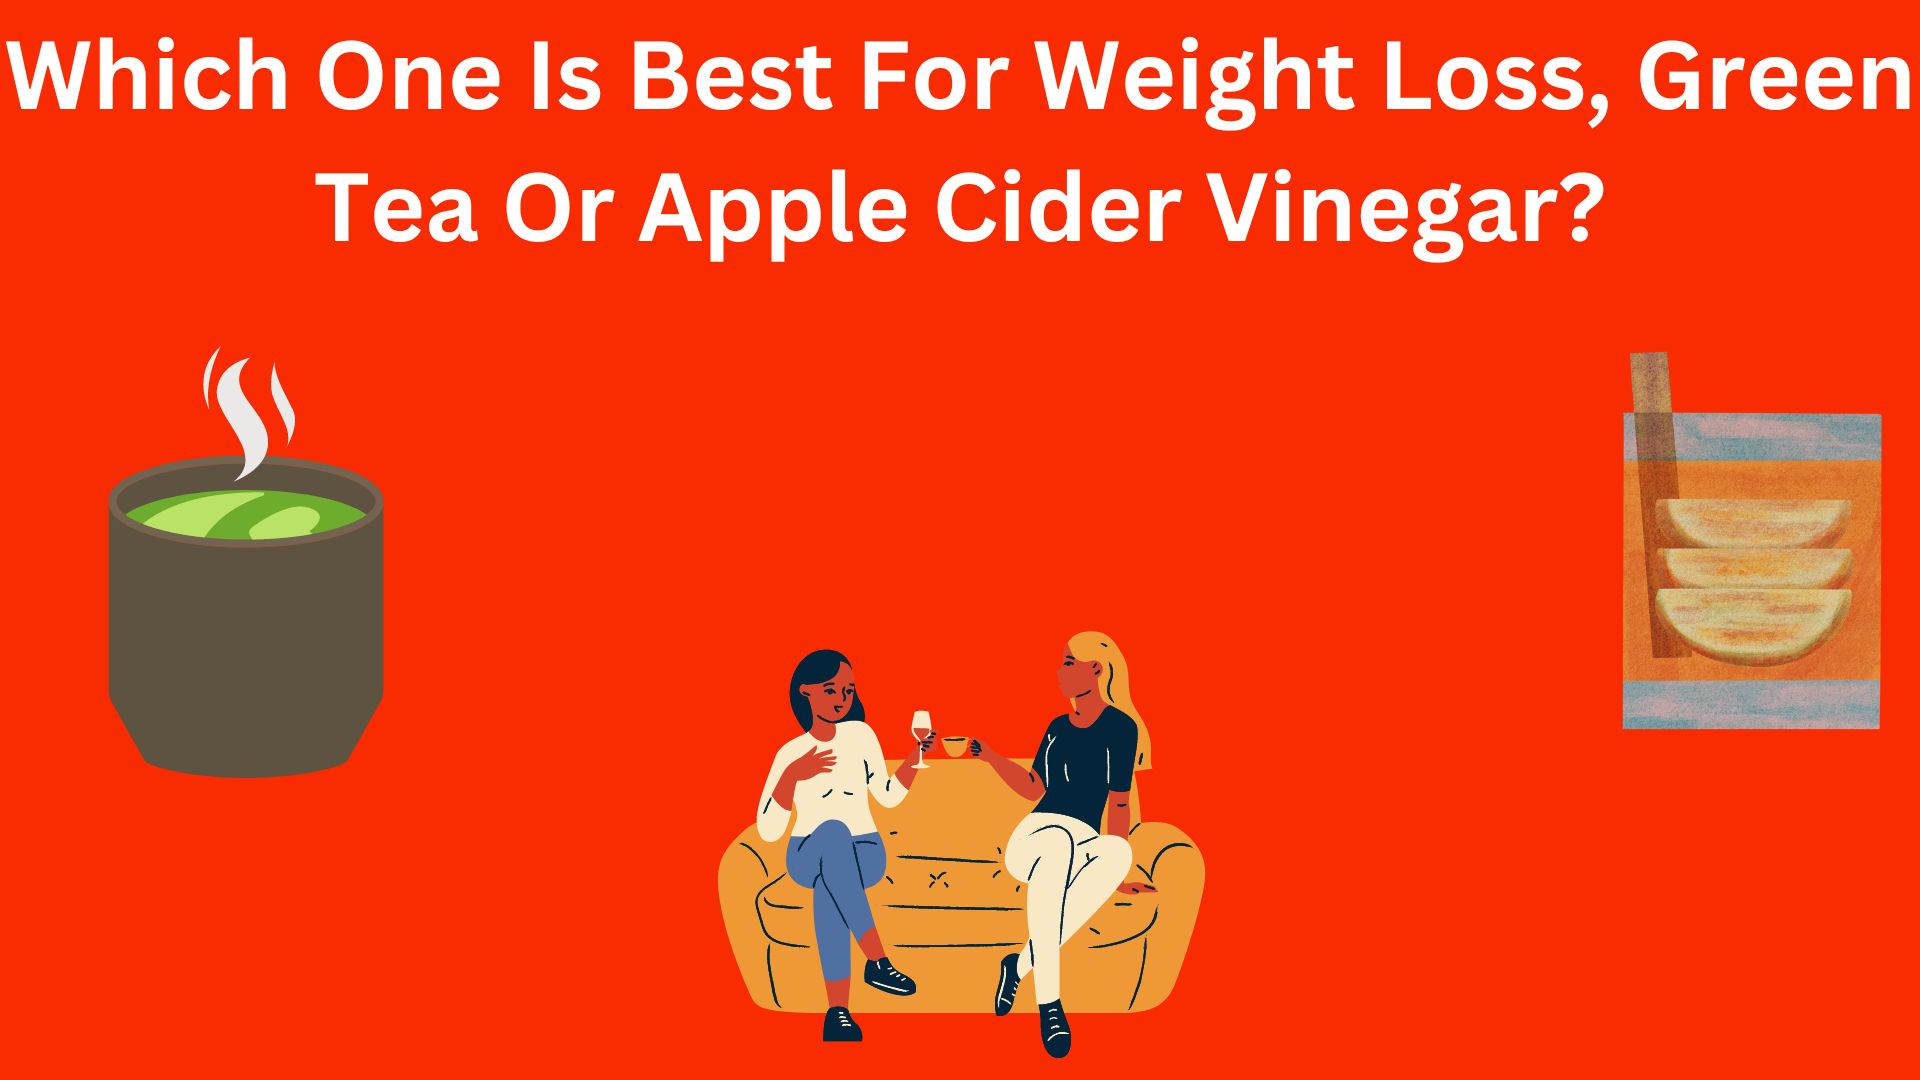 Which One Is Best For Weight Loss, Green Tea Or Apple Cider Vinegar